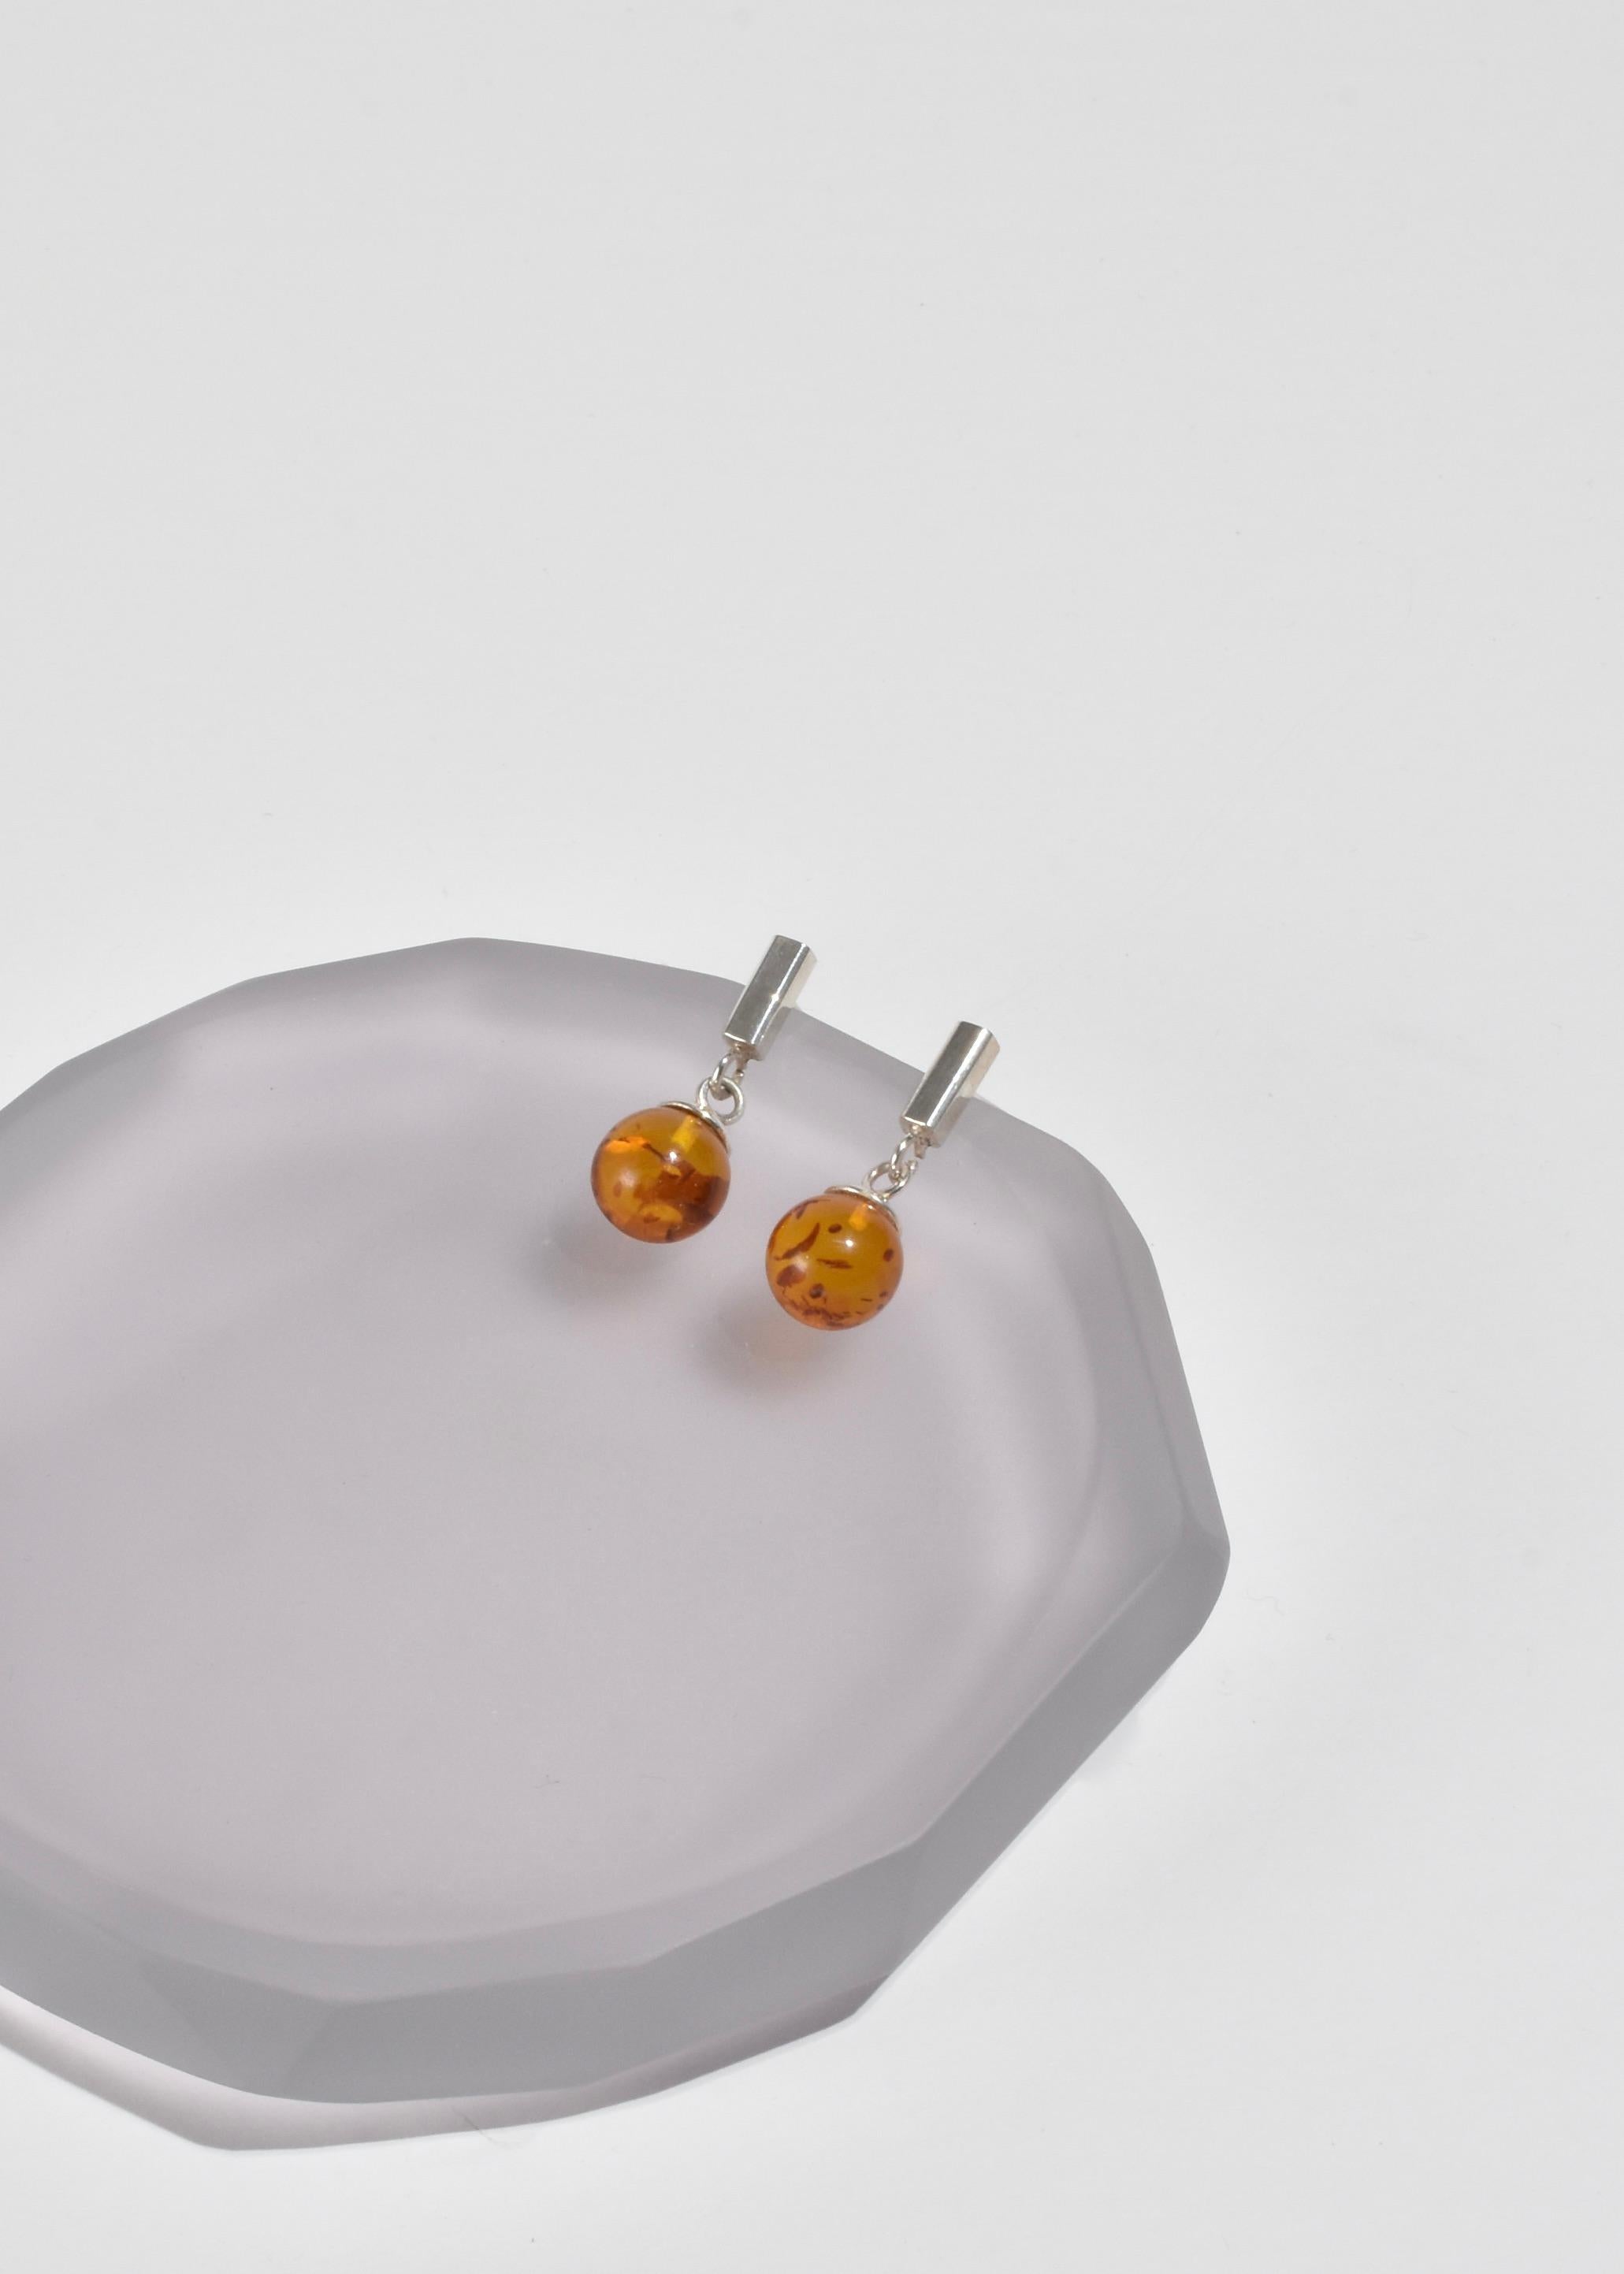 Vintage silver earrings with amber sphere drop detail, pierced. Stamped 925.

Material: Sterling silver, amber.